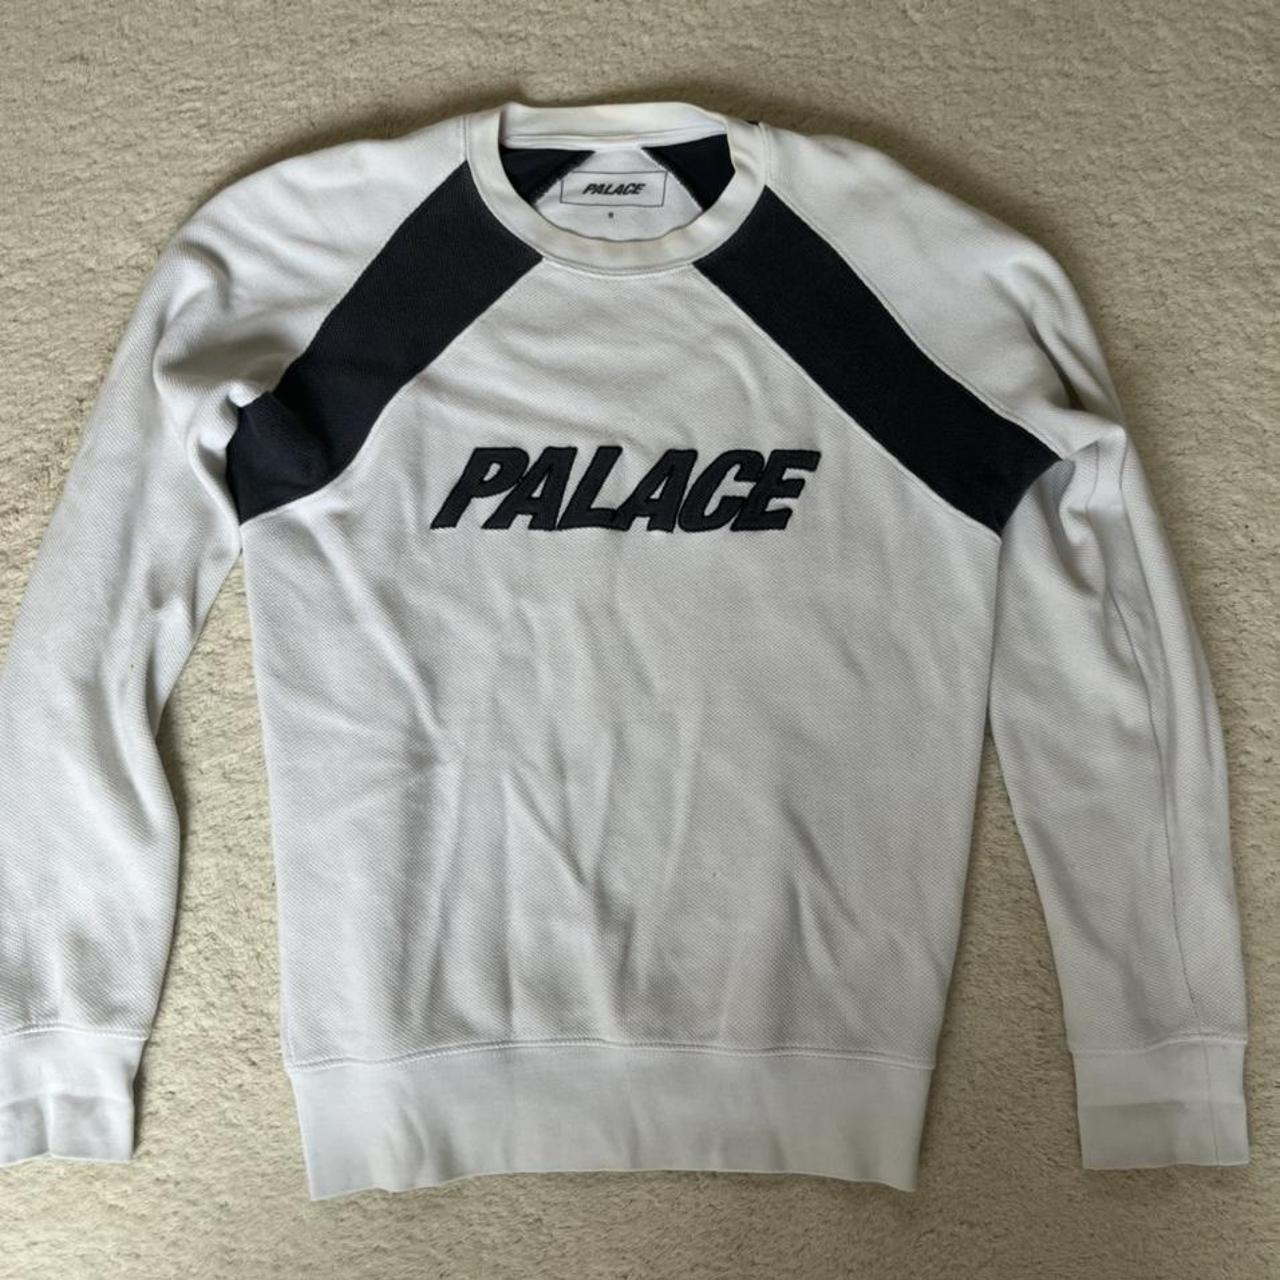 Rare palace sweatshirt jumper. Great condition with... - Depop